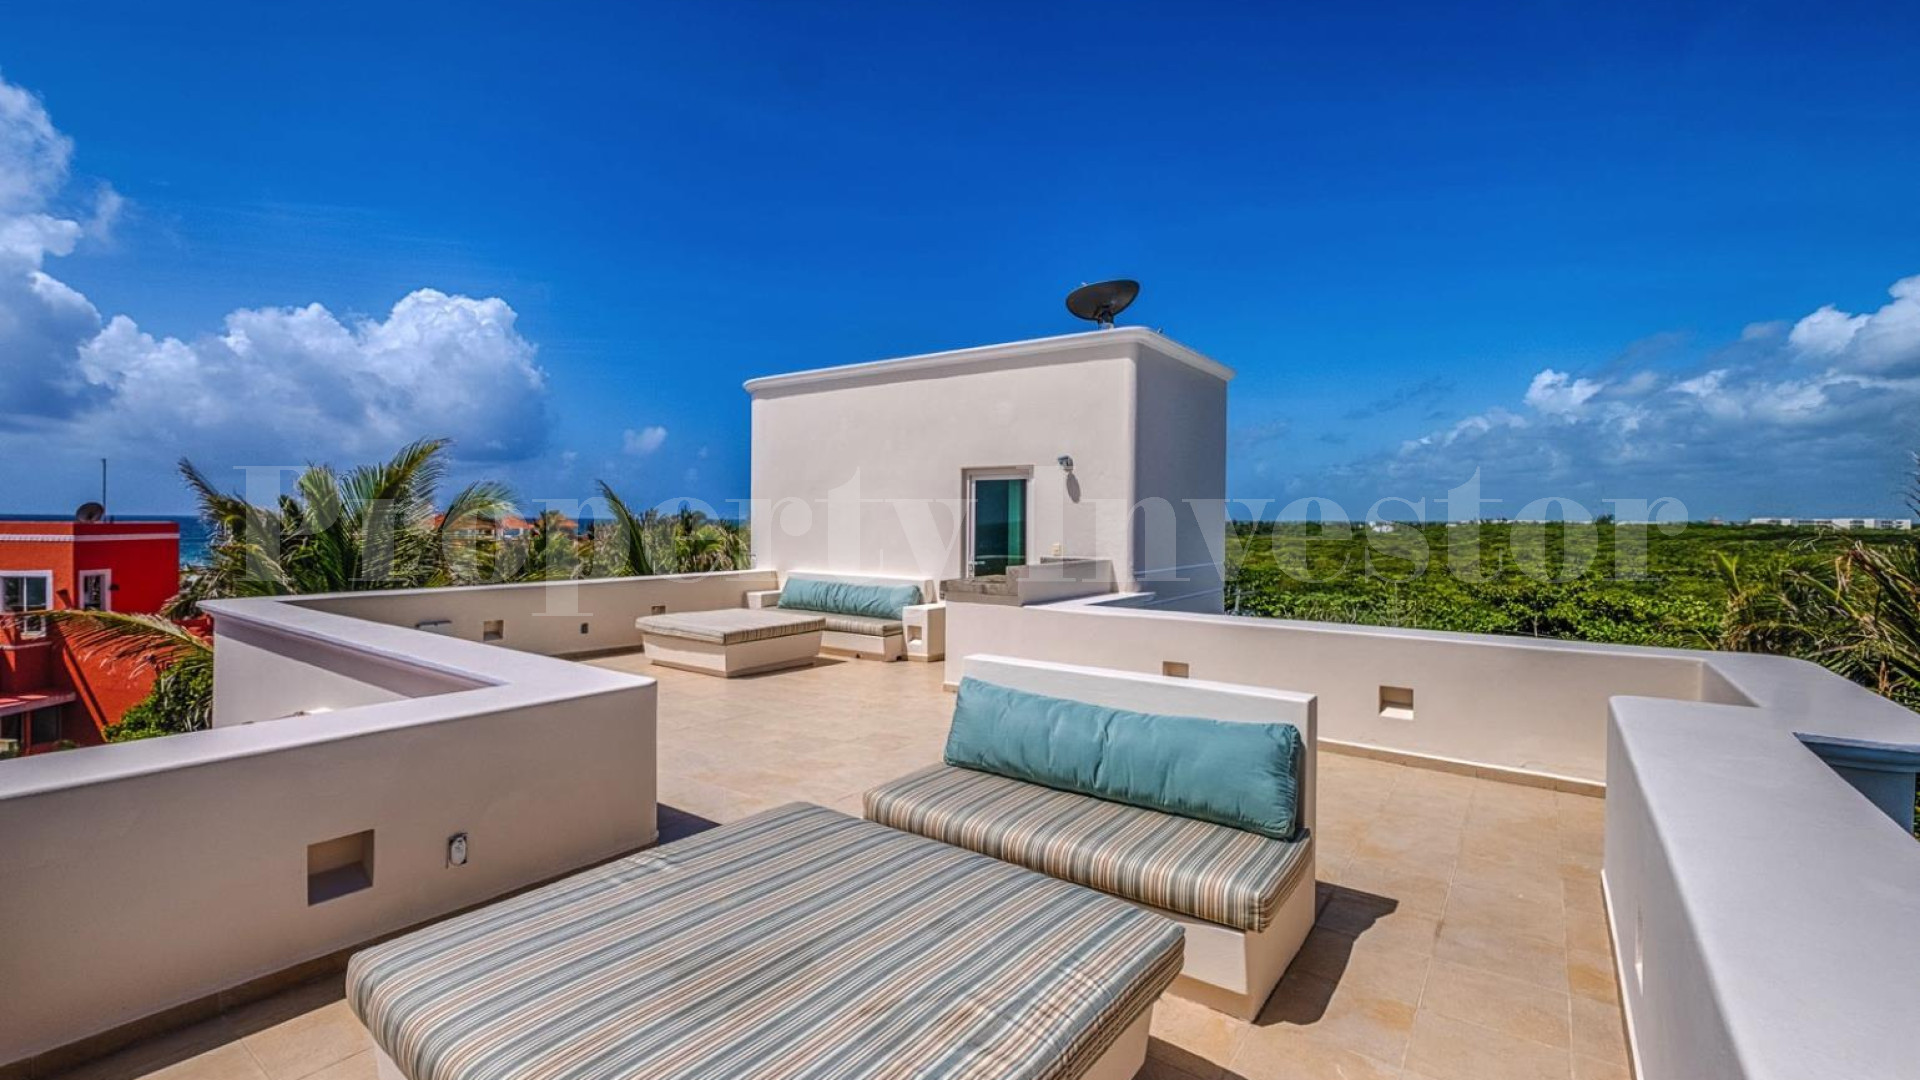 Incredible 6 Bedroom Luxury Beachfront Villa with Private Beach Access for Sale in Akumal, Mexico